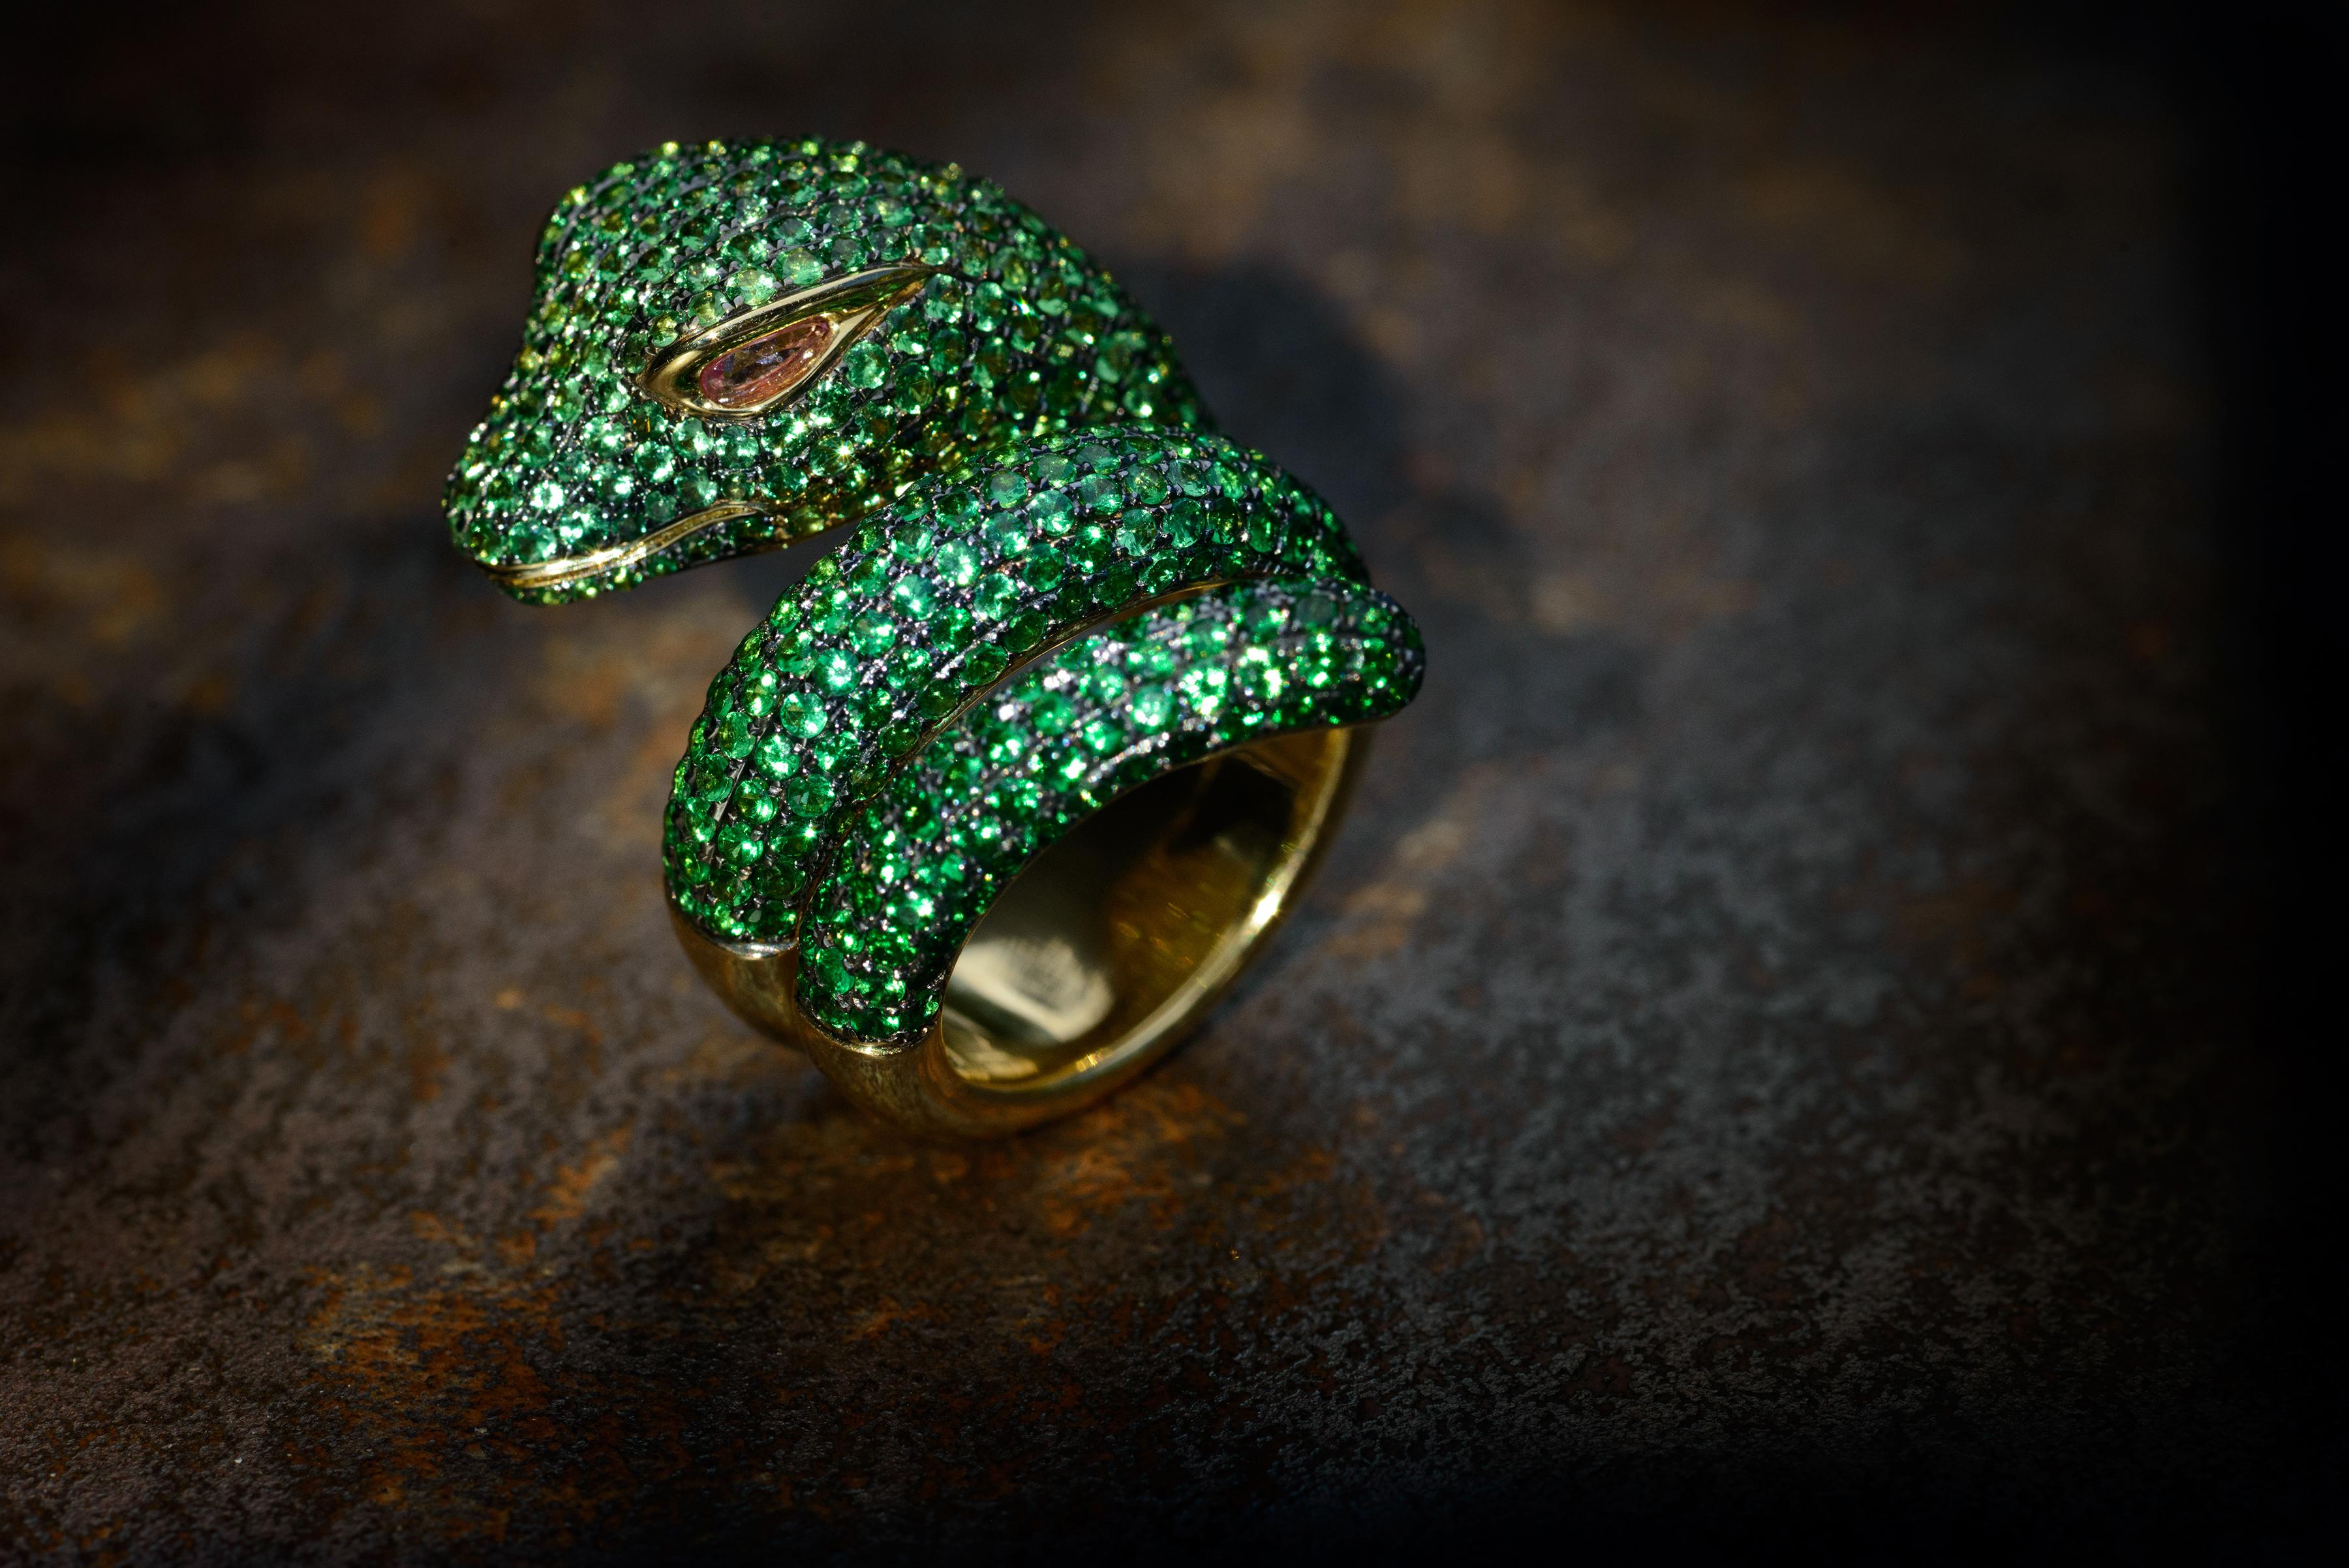 Anaconda snake shaped ring in 18 Karat yellow and black Gold with 6.46 Carat of Tsavorites on body and pear shaped cut 0.14 Carat pink Sapphire eyes.
None in stock available.
Lead time for any new orders is 8 weeks.
No returns for custom / made to